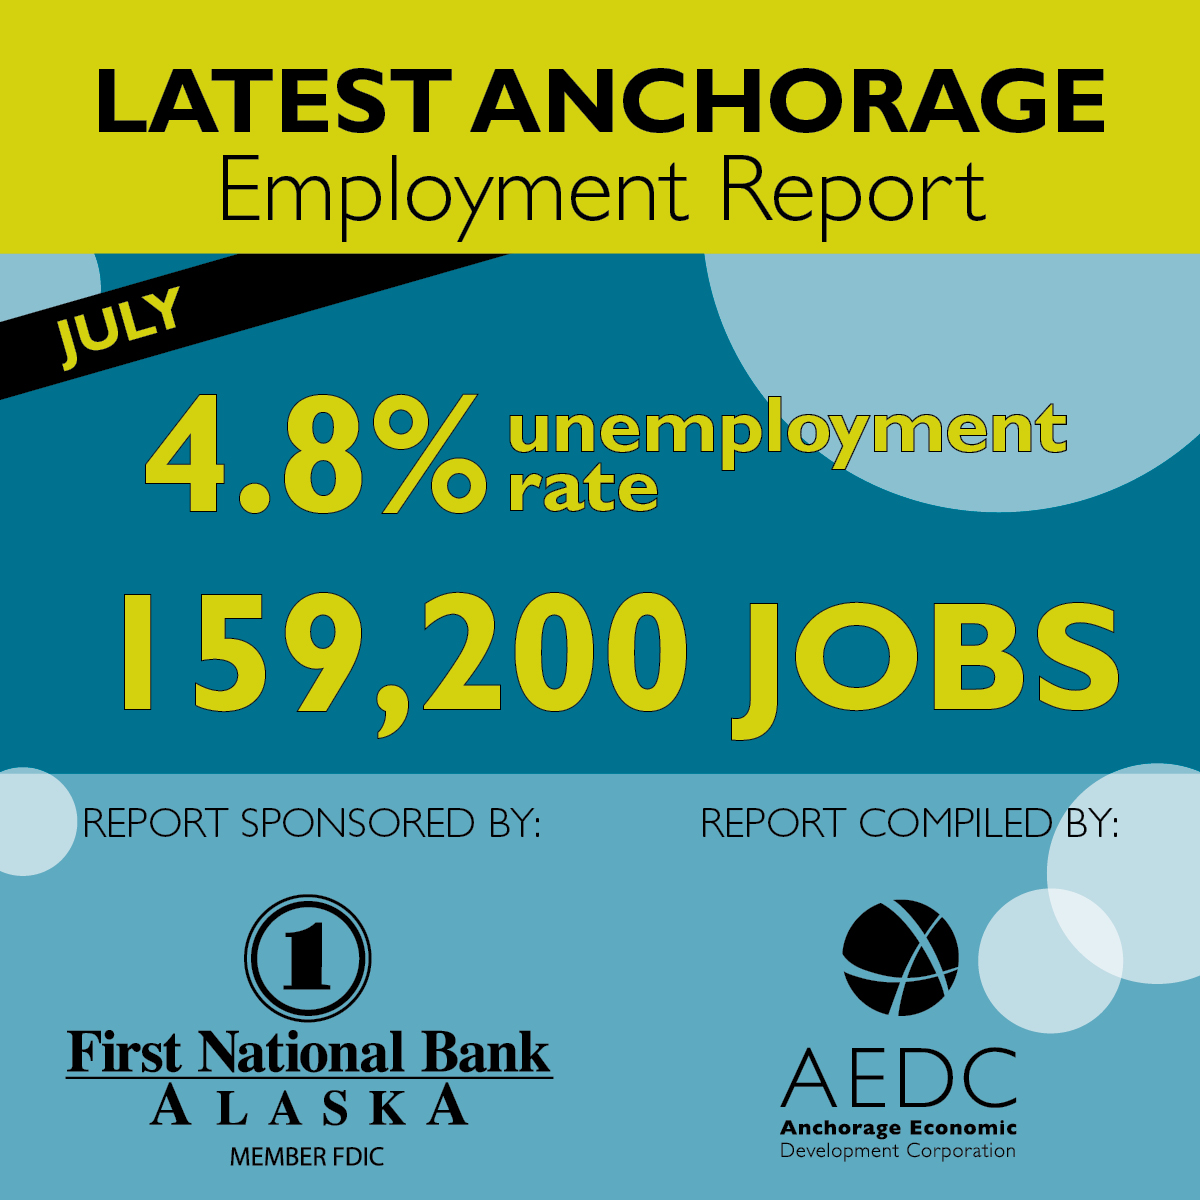 Anchorage Employment Report: Fifth Edition 2015